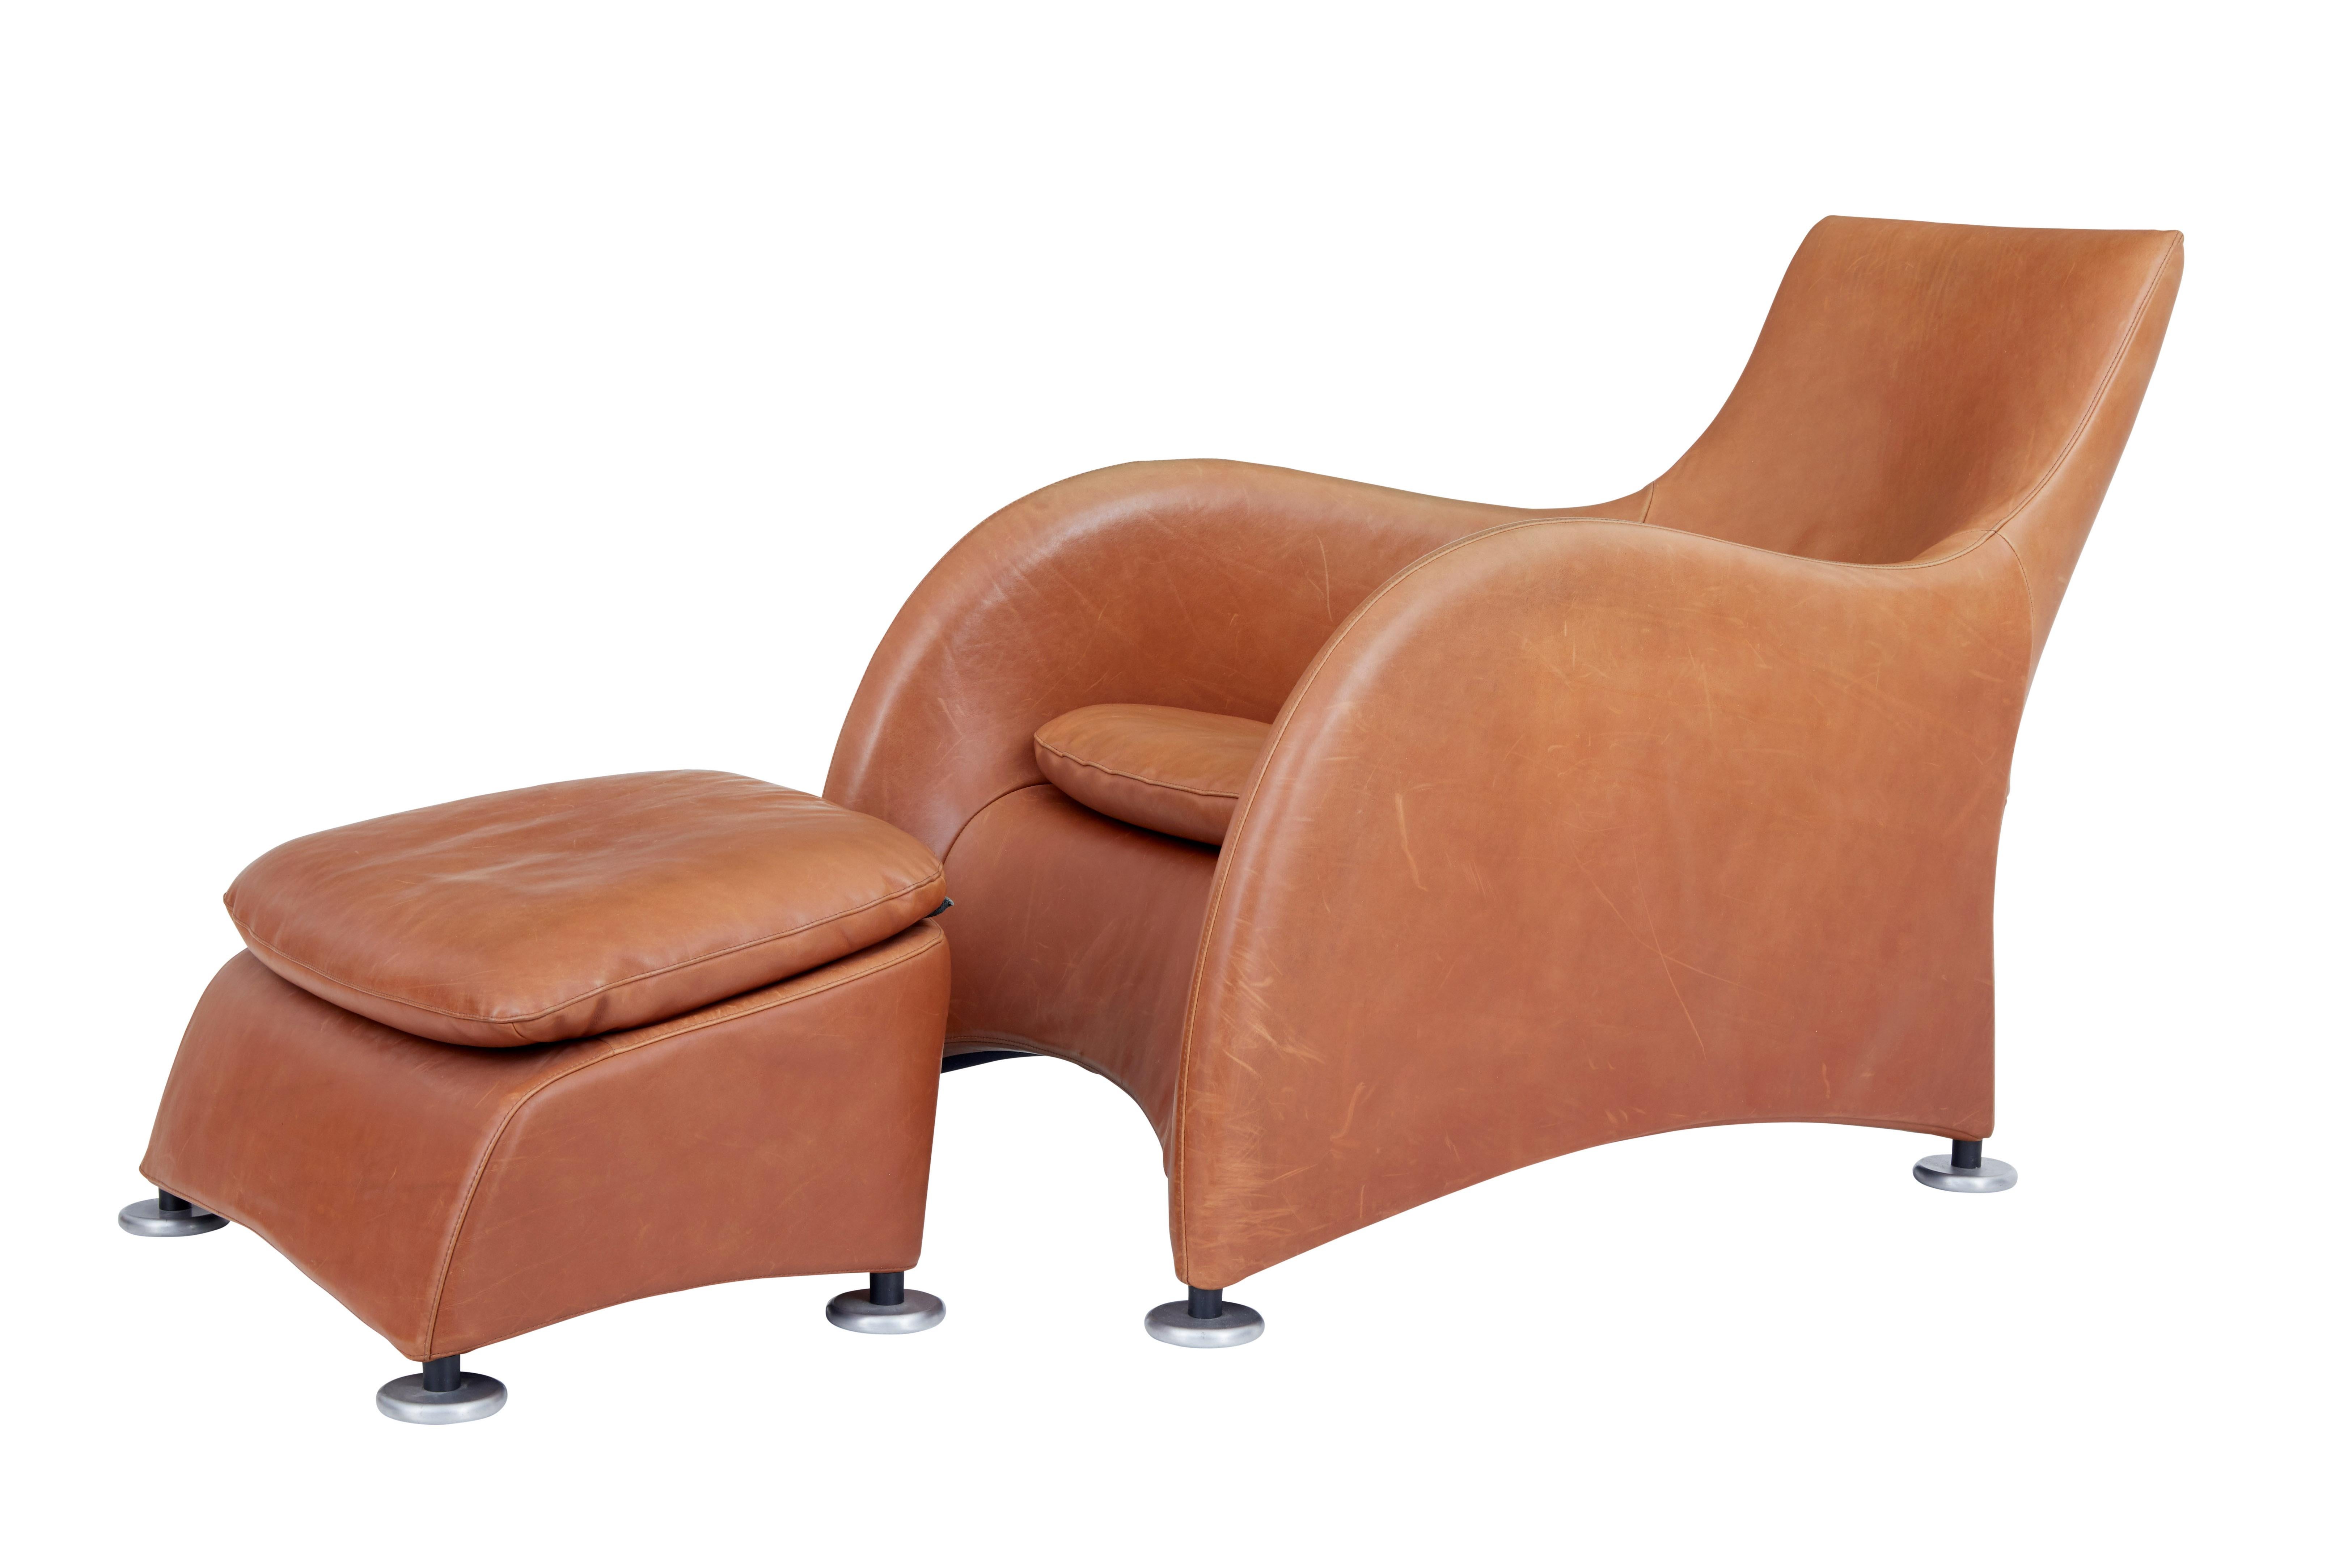 Fine pair of leather chairs and matching stools from the 1980s.

Designed by Dutch designer Gerard van der Berg for Montis. This chair offers to ultimate in relaxation and comfort, masculine in design and ideal for taller people to recline